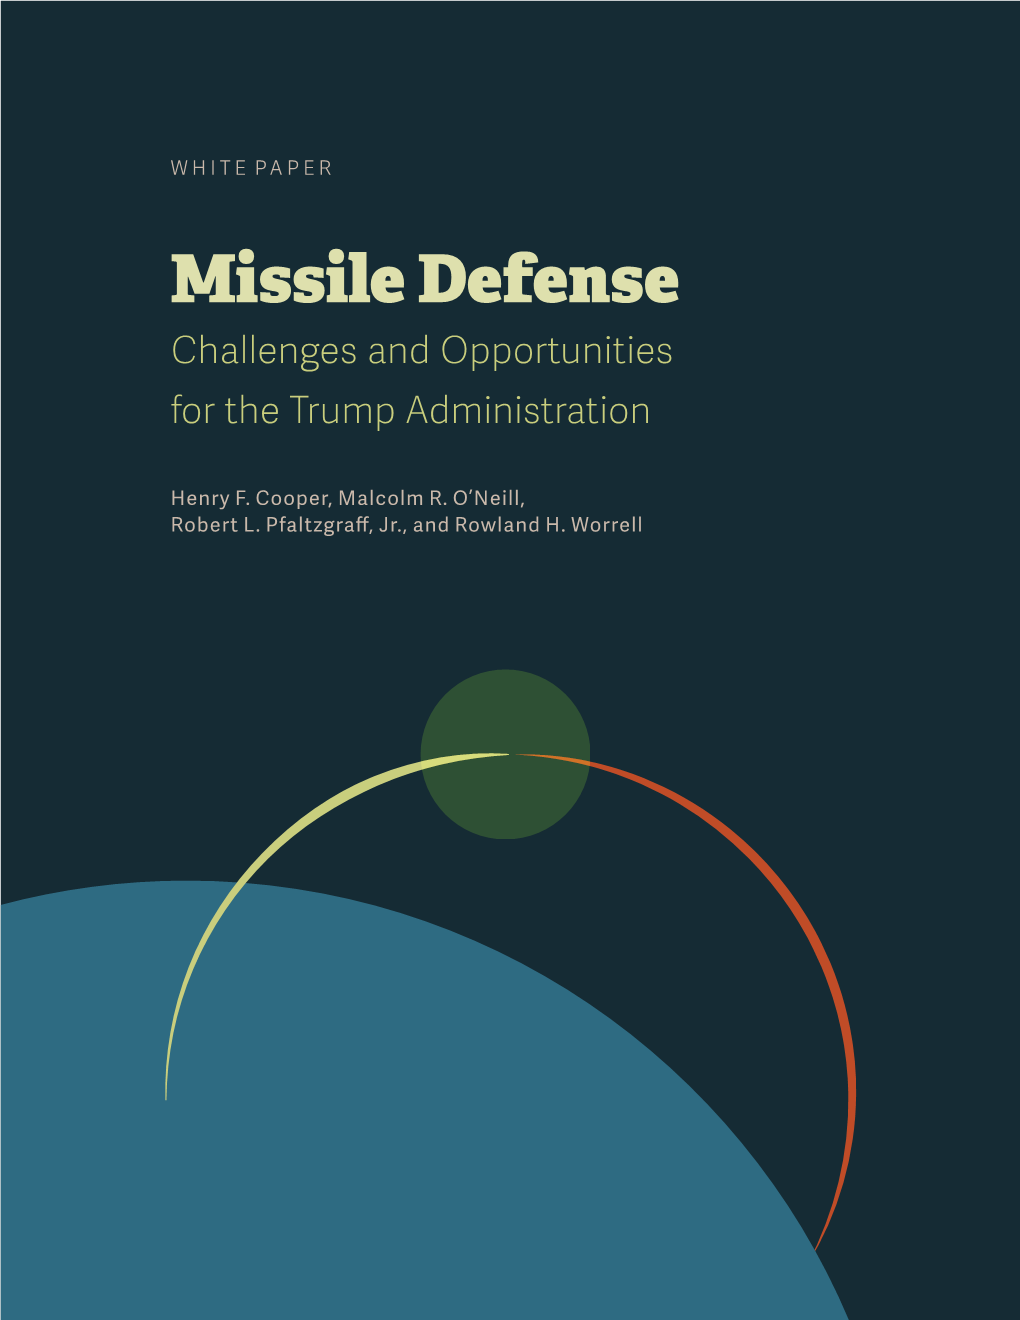 Missile Defense Challenges and Opportunities for the Trump Administration